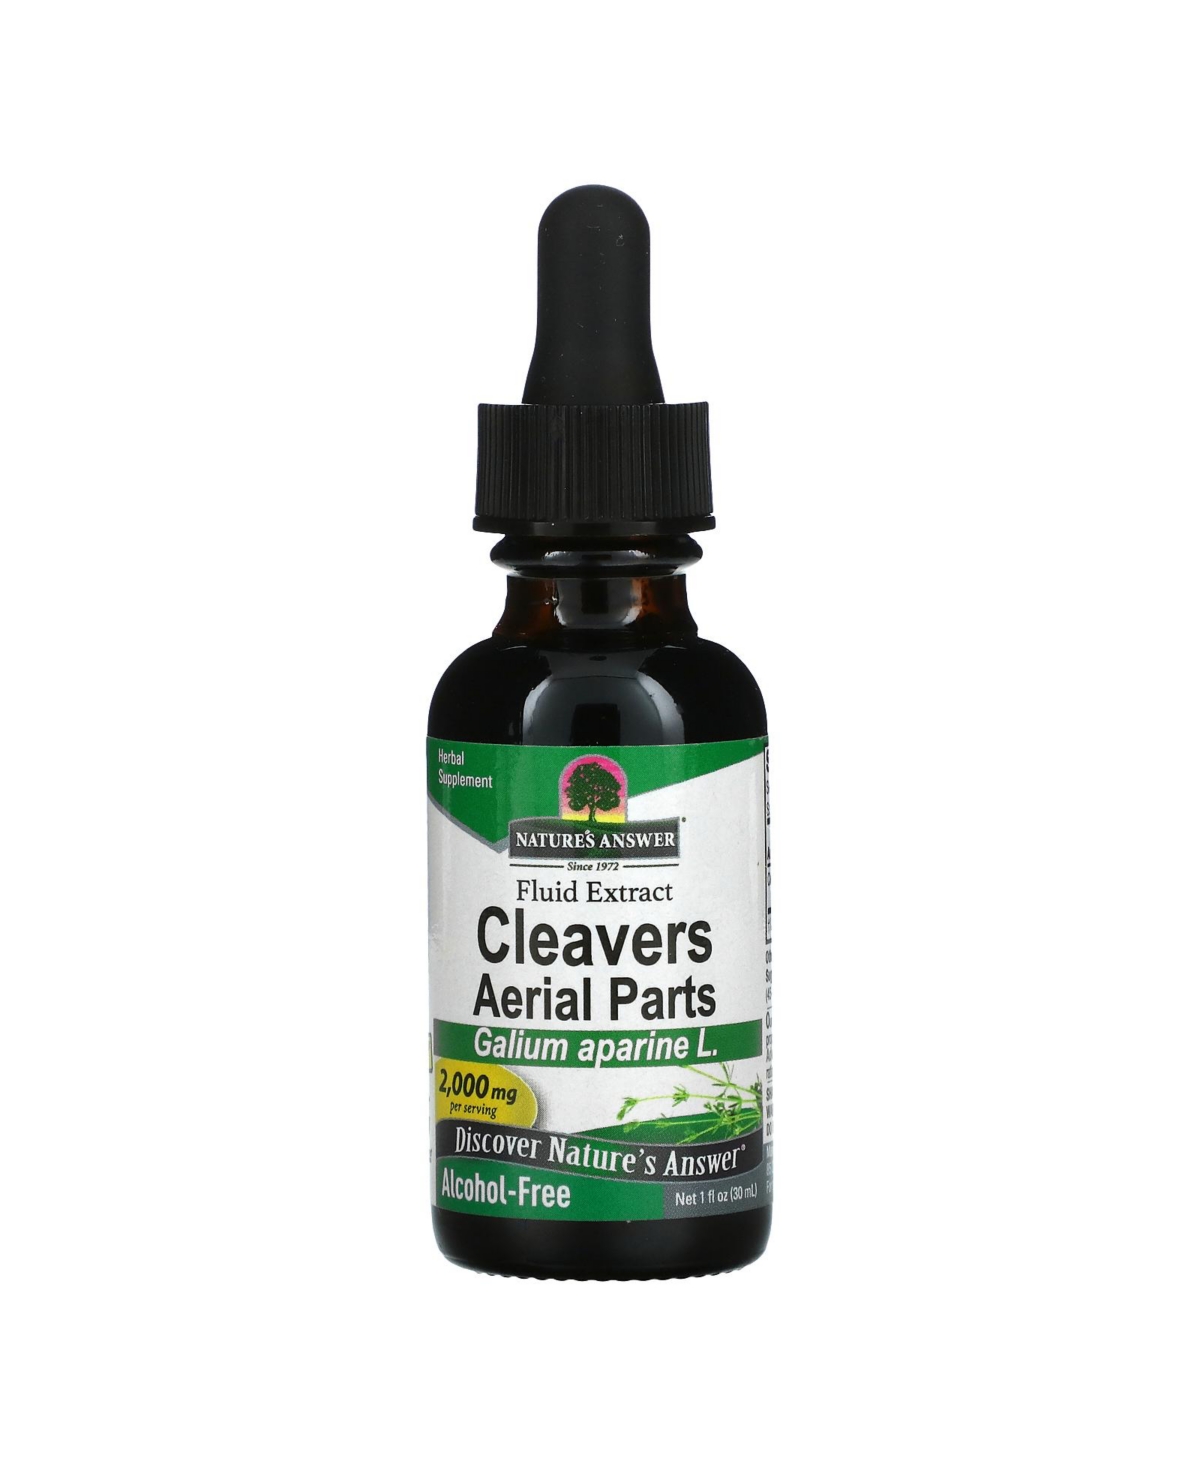 Cleavers Aerial Parts Fluid Extract Alcohol Free 2 000 mg - 1 fl oz (30 - Assorted Pre-pack (See Table